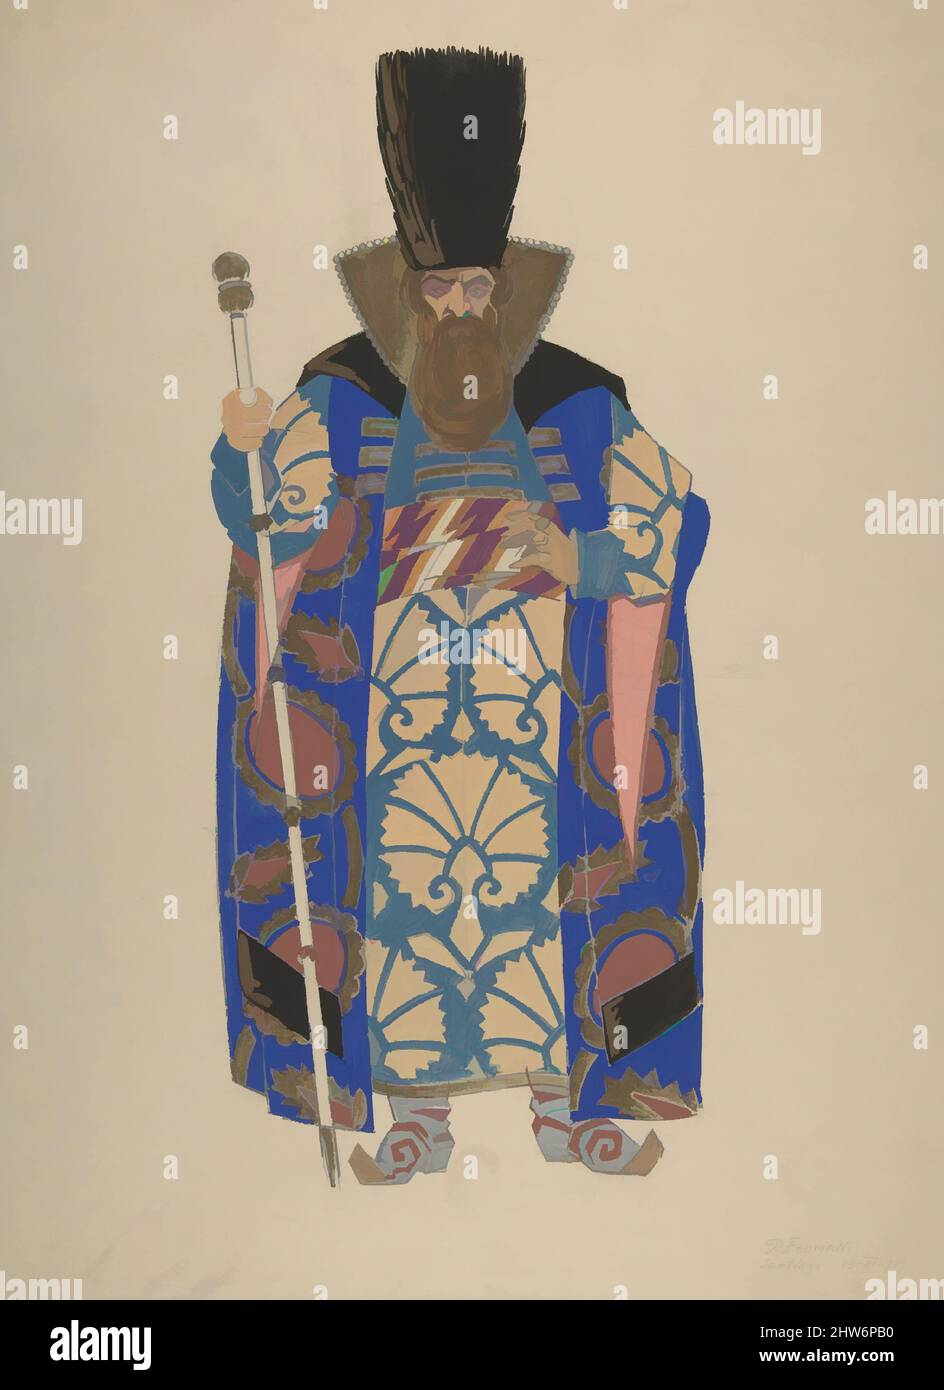 Art inspired by Costume Study for a Robed, Bearded Boyar with Staff, early 20th century, Watercolor, gouache, gold paint, over graphite., sheet: 16 5/8 x 12 3/16 in. (42.3 x 31 cm), Drawings, Pavel Petrovic Froman (Russian, Moscow 1894–1940 Zagreb, Classic works modernized by Artotop with a splash of modernity. Shapes, color and value, eye-catching visual impact on art. Emotions through freedom of artworks in a contemporary way. A timeless message pursuing a wildly creative new direction. Artists turning to the digital medium and creating the Artotop NFT Stock Photo